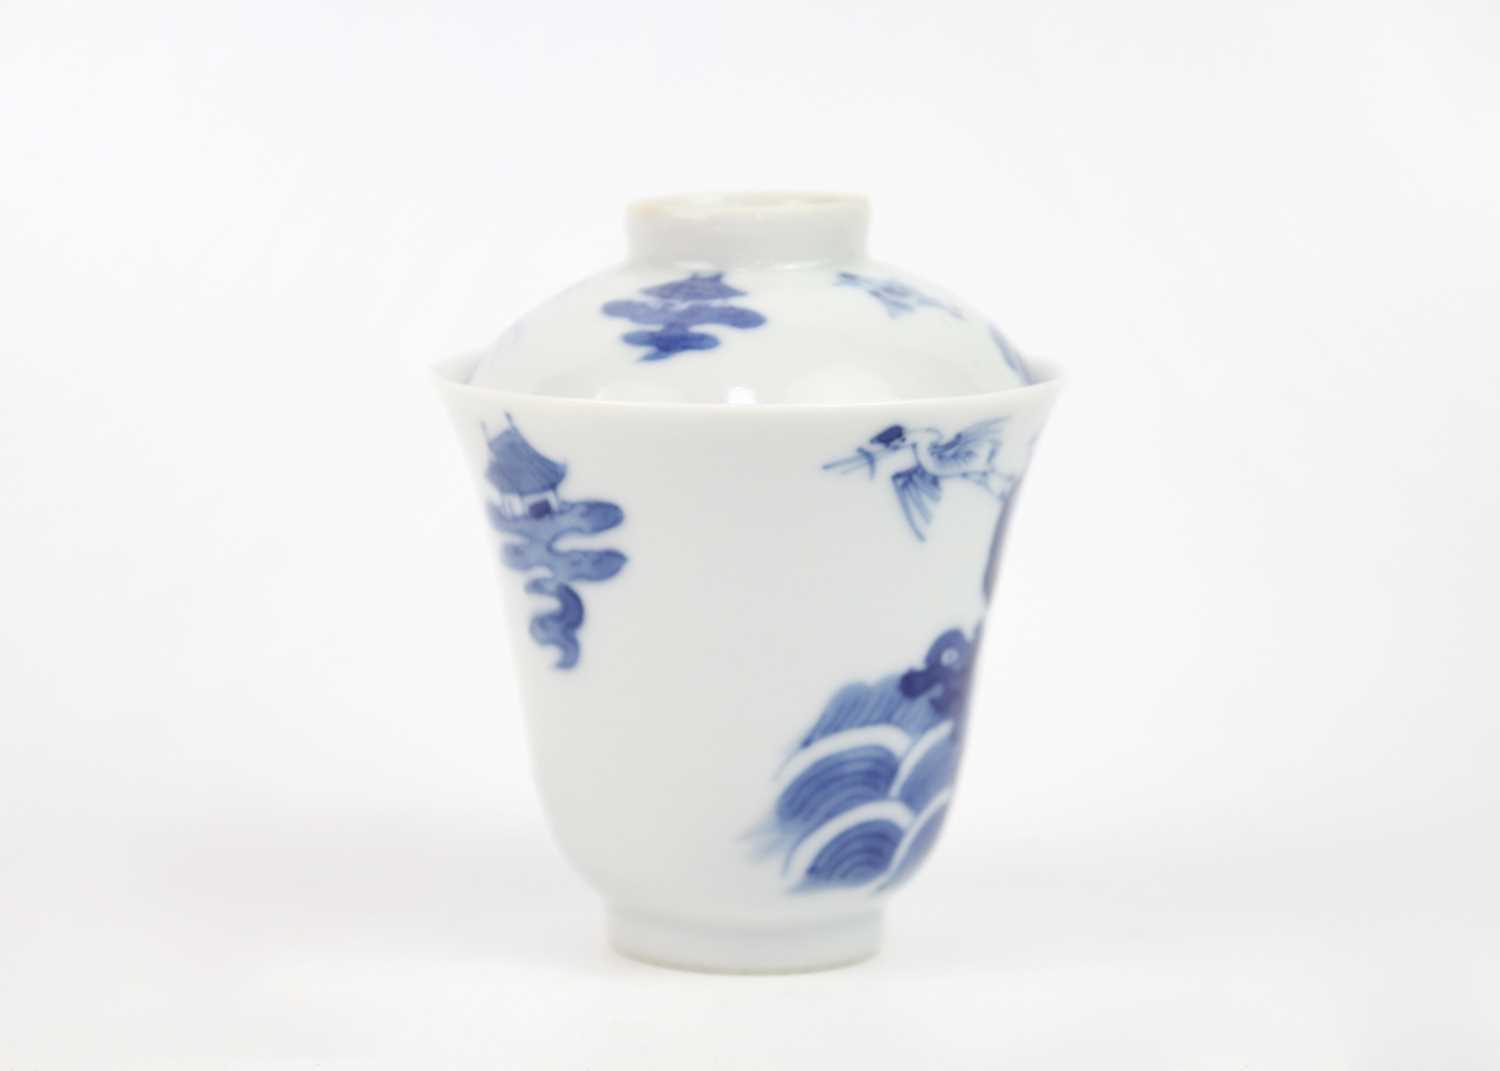 A set of Chinese blue and white porcelain cups, covers and stands, 18th century. - Image 7 of 41